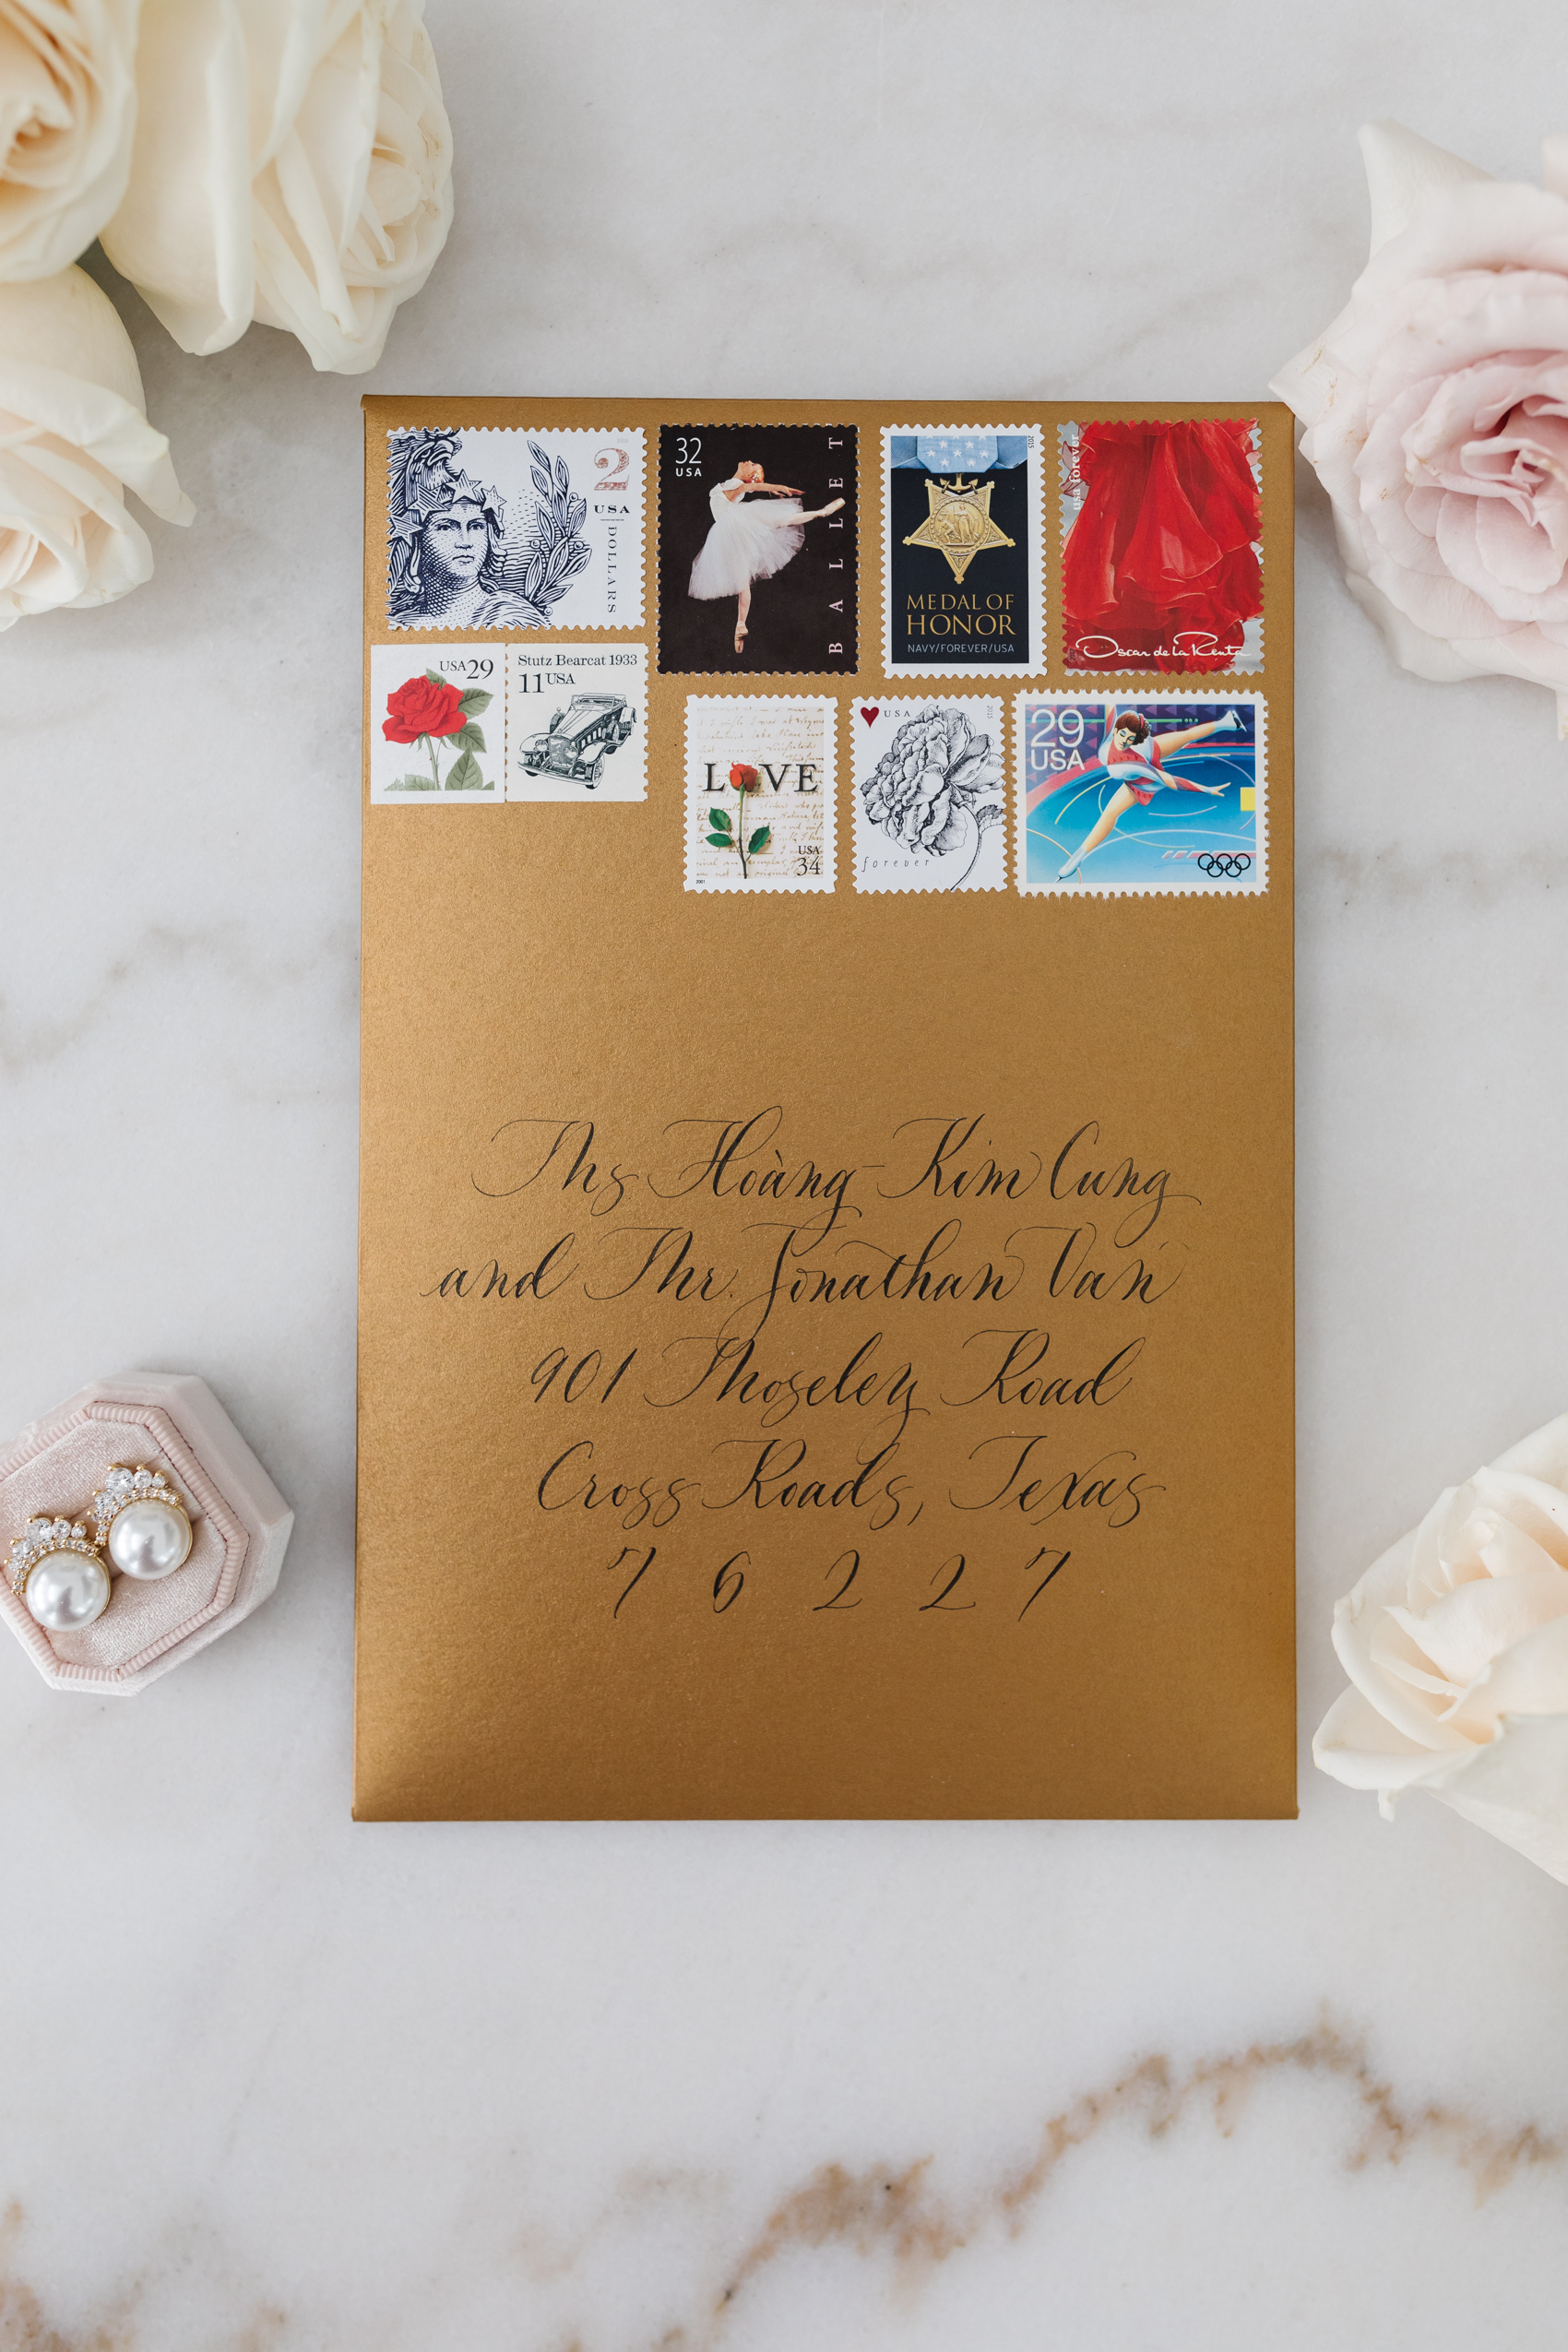 Blogger Hoang-Kim Cung's custom wedding invitations with gold envelopes, calligraphy, and curated stamps